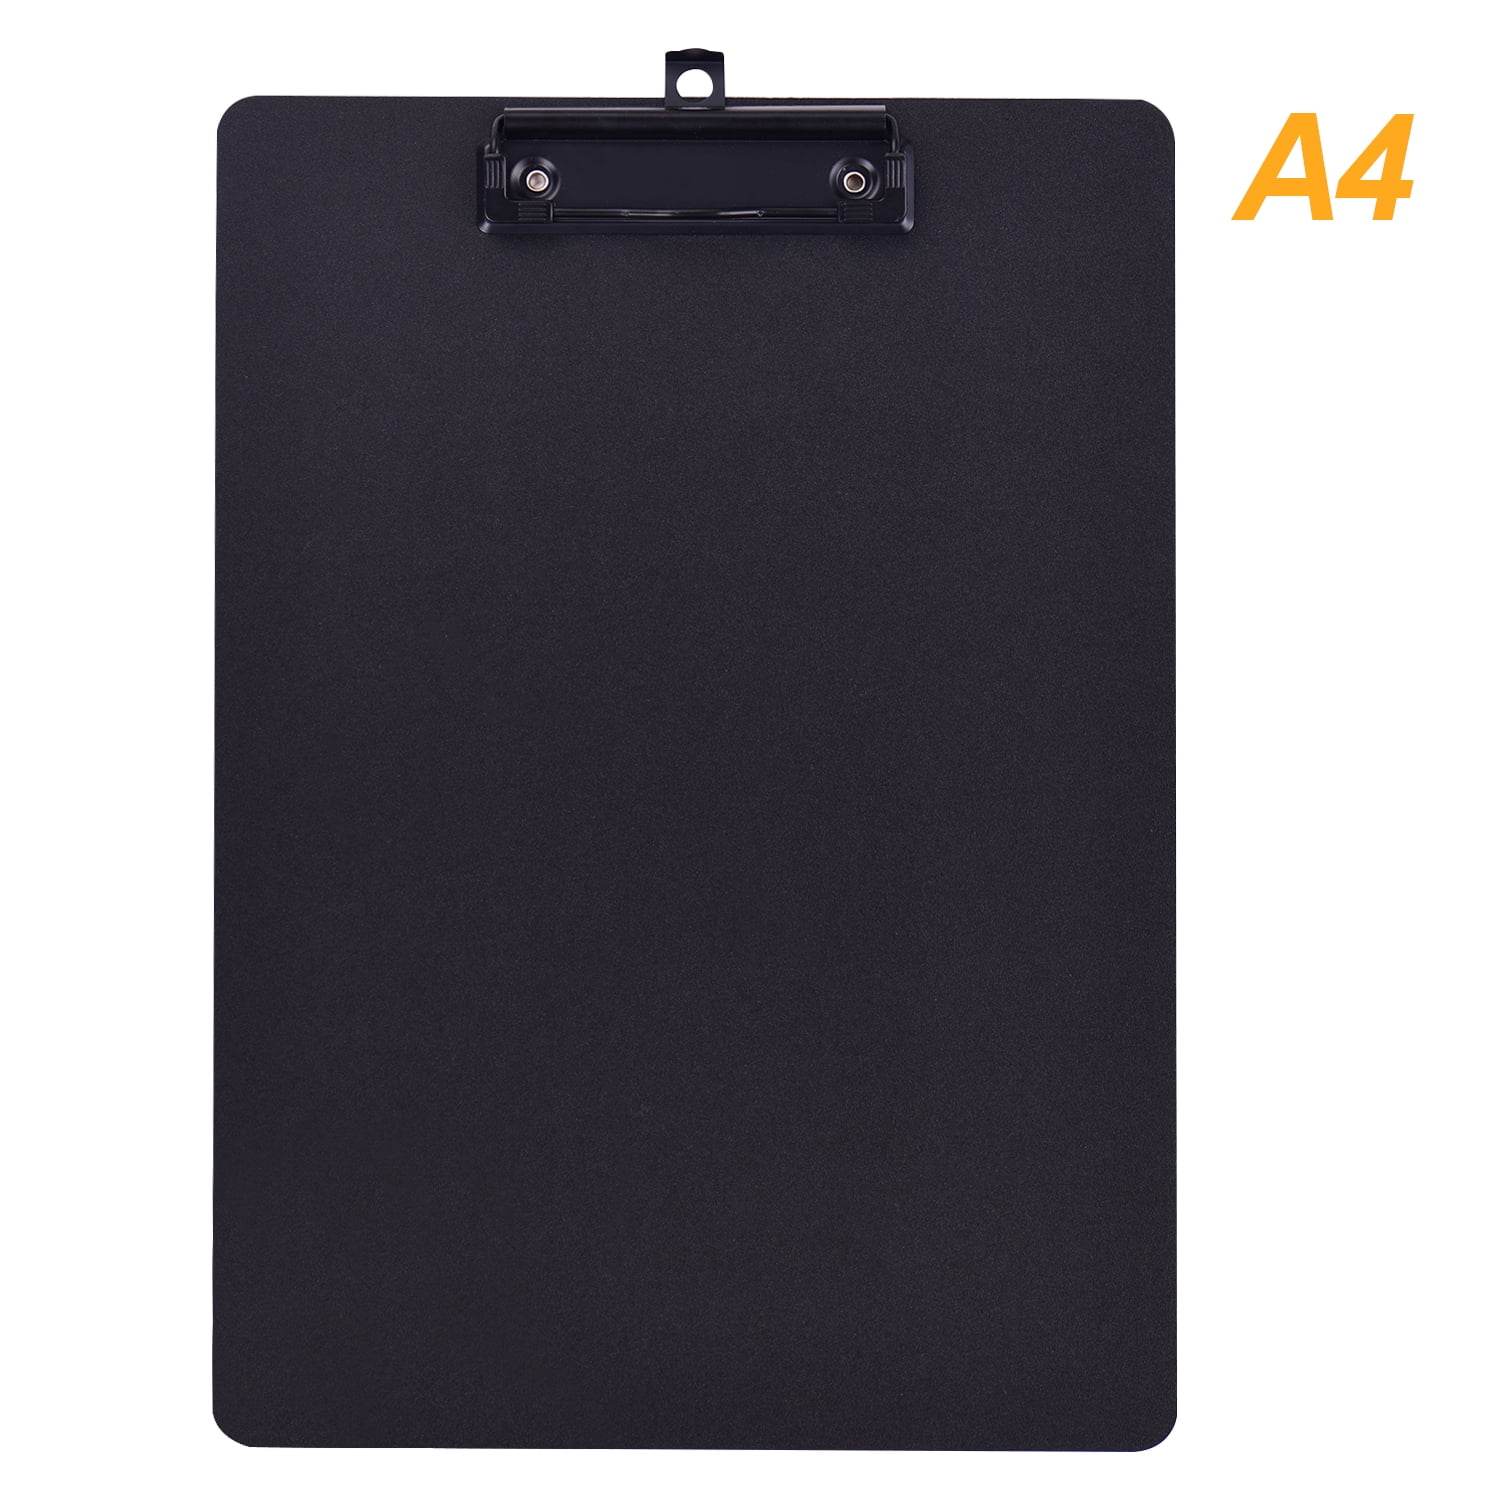 A4 Size Plastic Clipboard Writing Pad Board Low Profile Clip Document D2J3